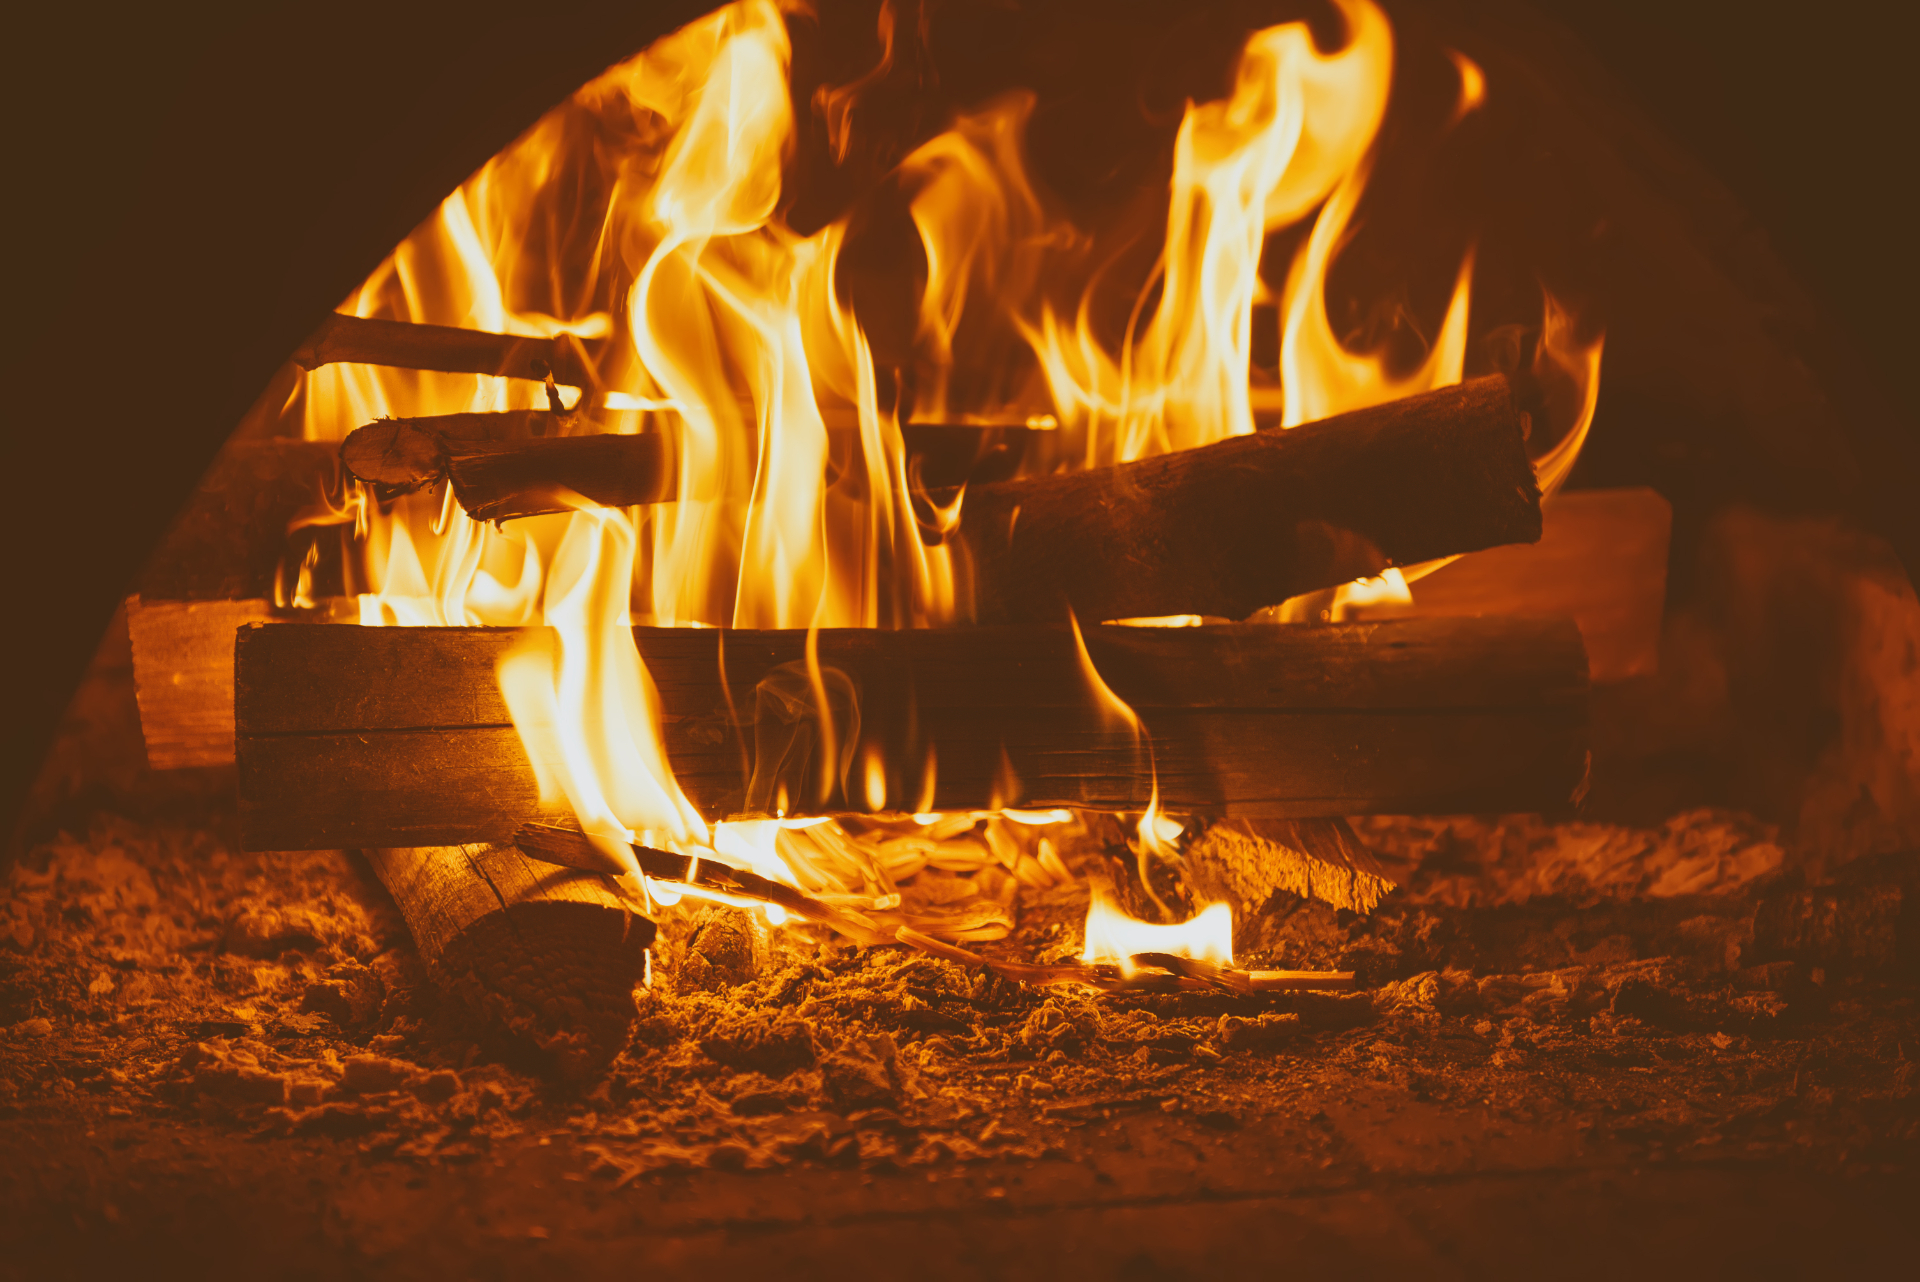 What Are The Benefits Of A Wood Burning Fire?